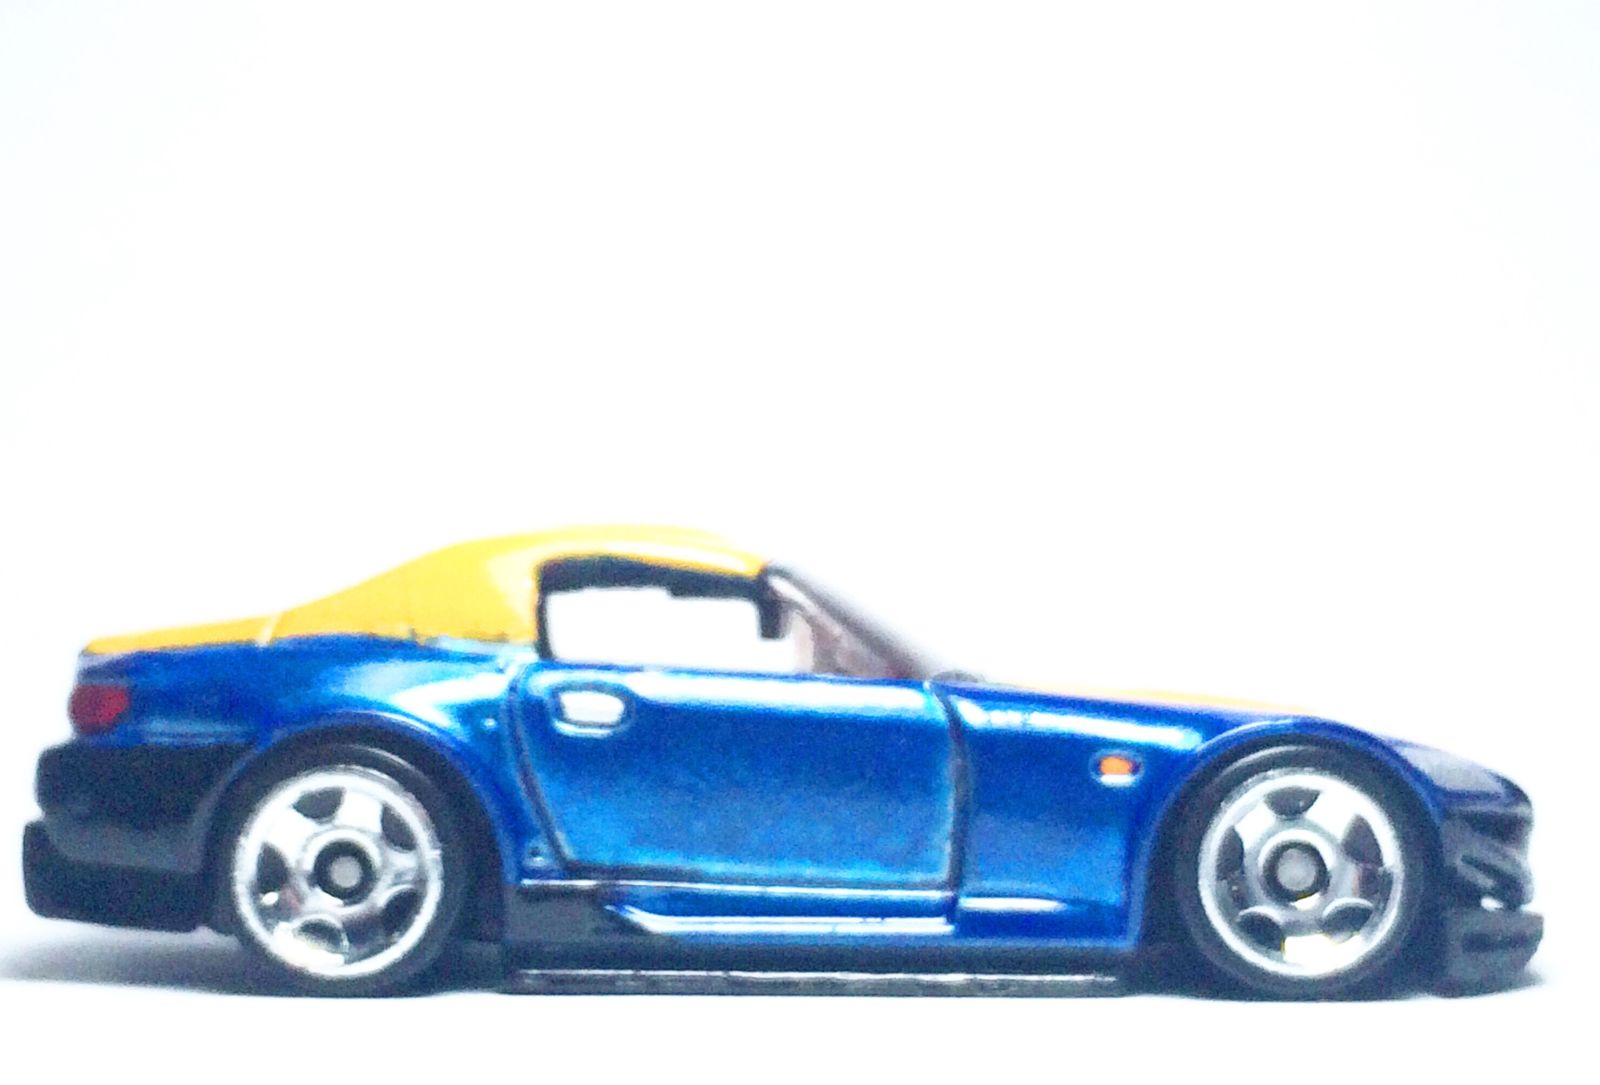 Illustration for article titled Anybody Say S2k?